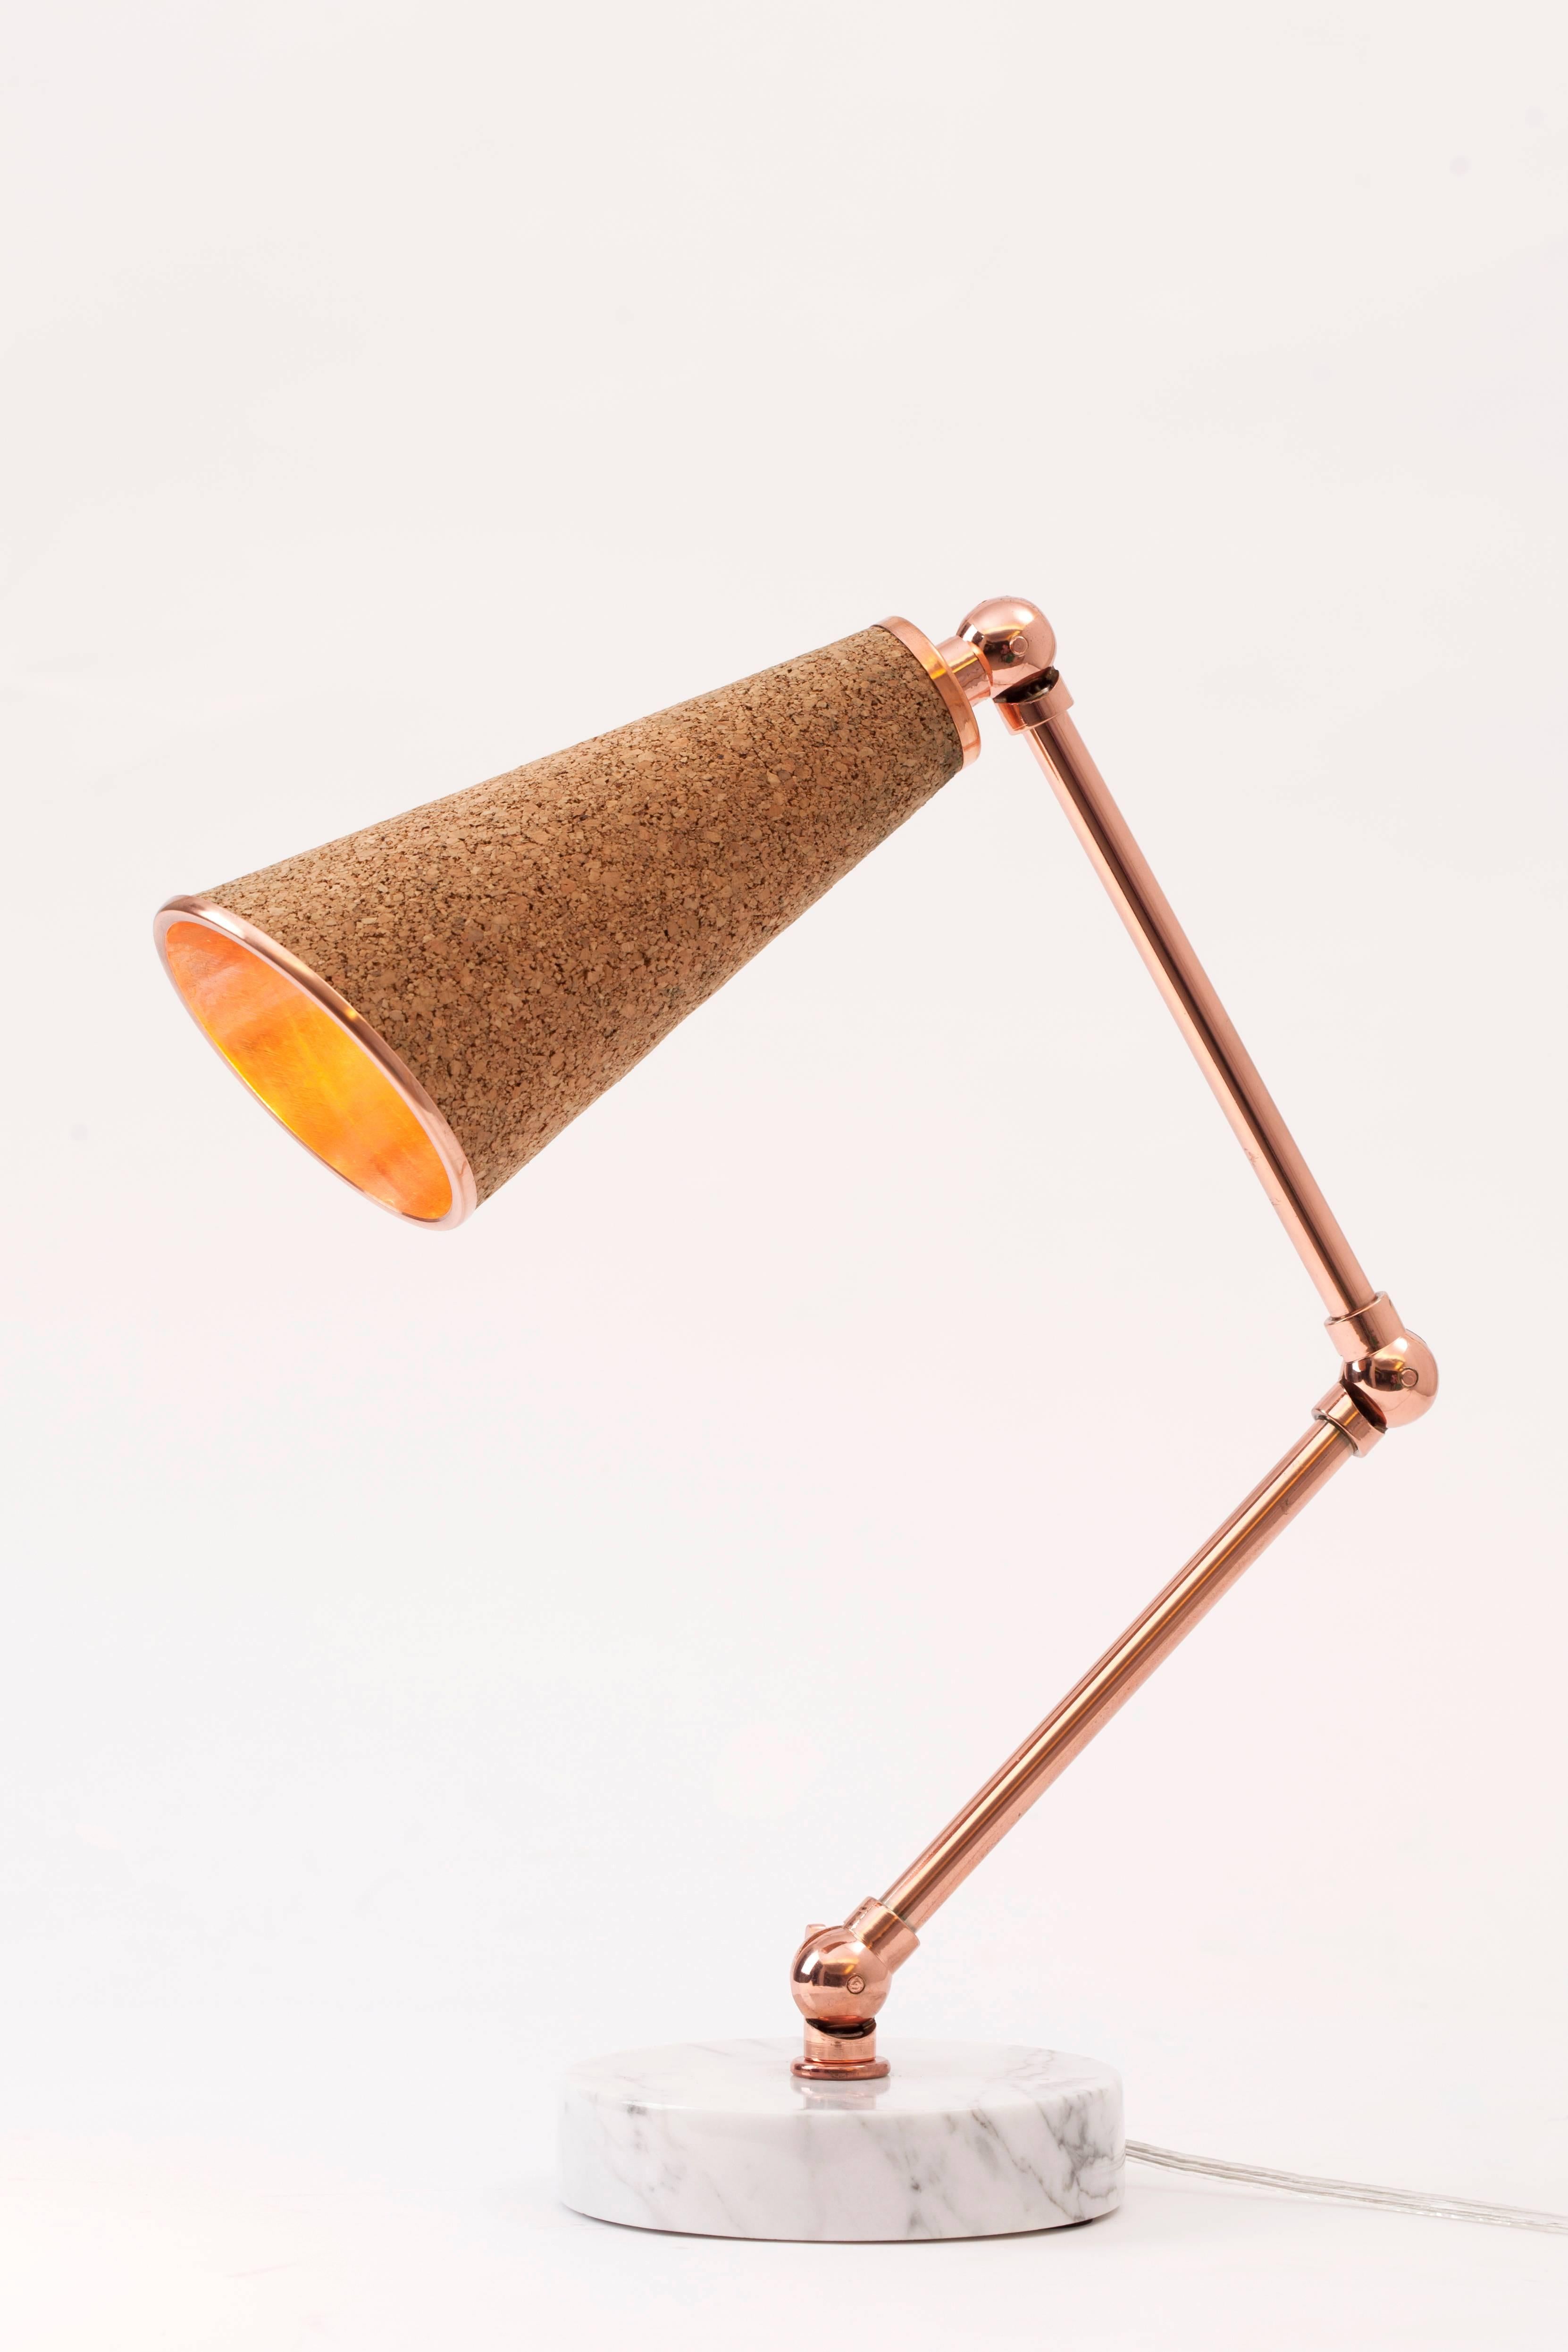 Lanterna Table Lamp in Carrara Marble, Cork and Copper with Adjustable Arms  (Türkisch) im Angebot